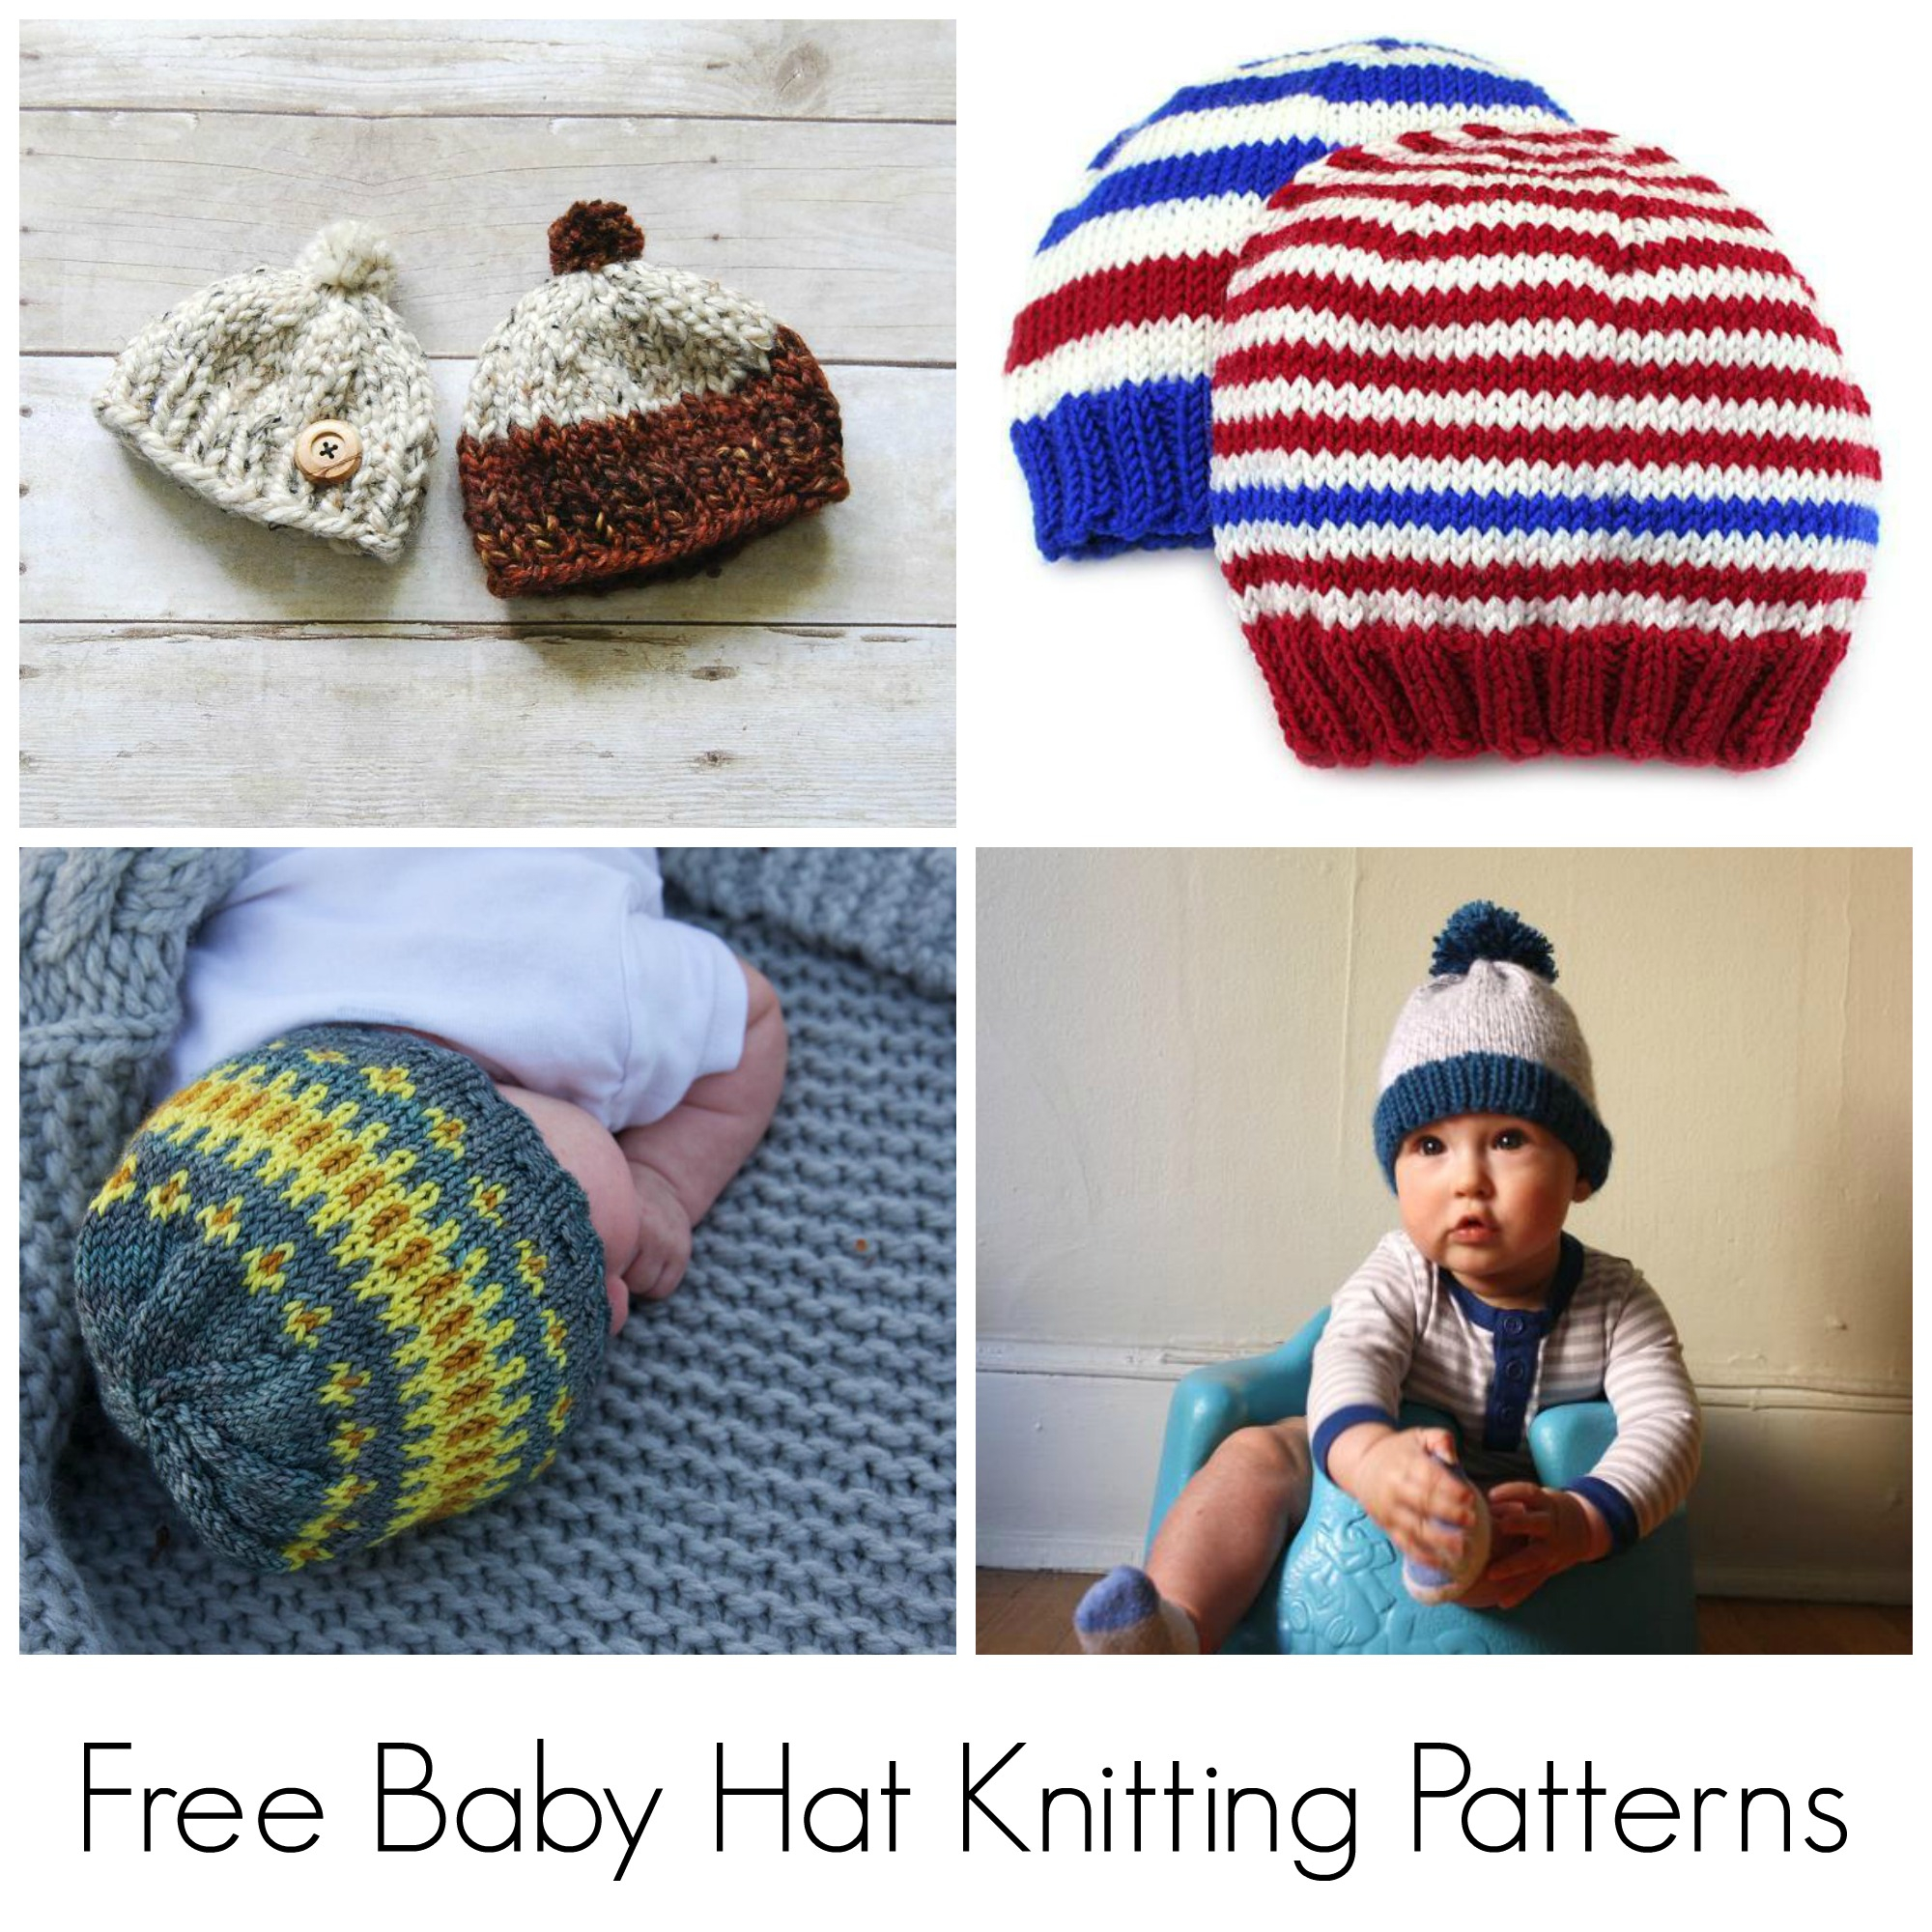 Free Knitting Patterns For Toques 10 Free Knitting Patterns For Ba Hats On Craftsy